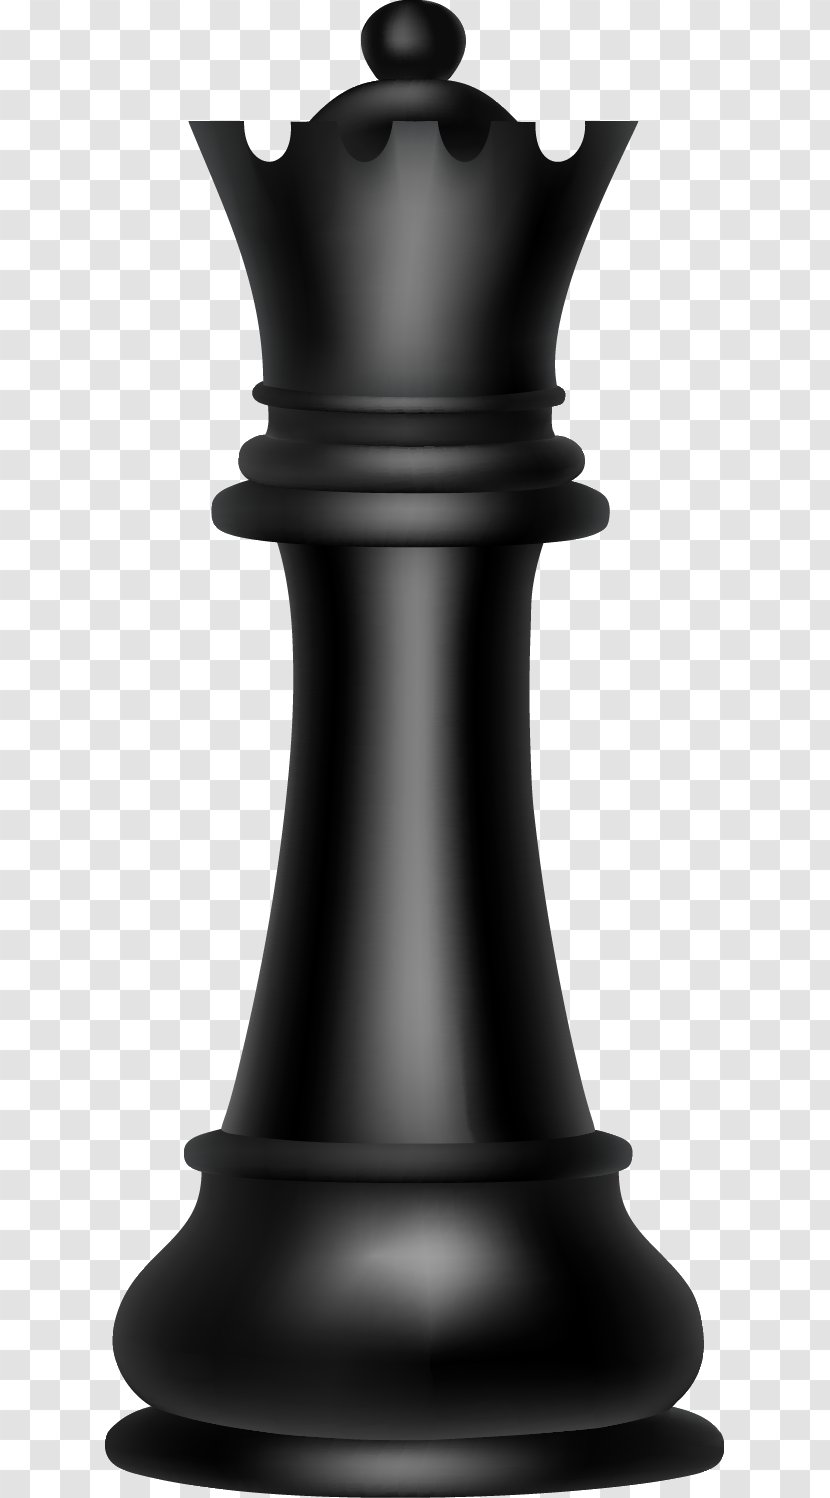 Chess Piece Xiangqi Euclidean Vector - Black And White Transparent PNG